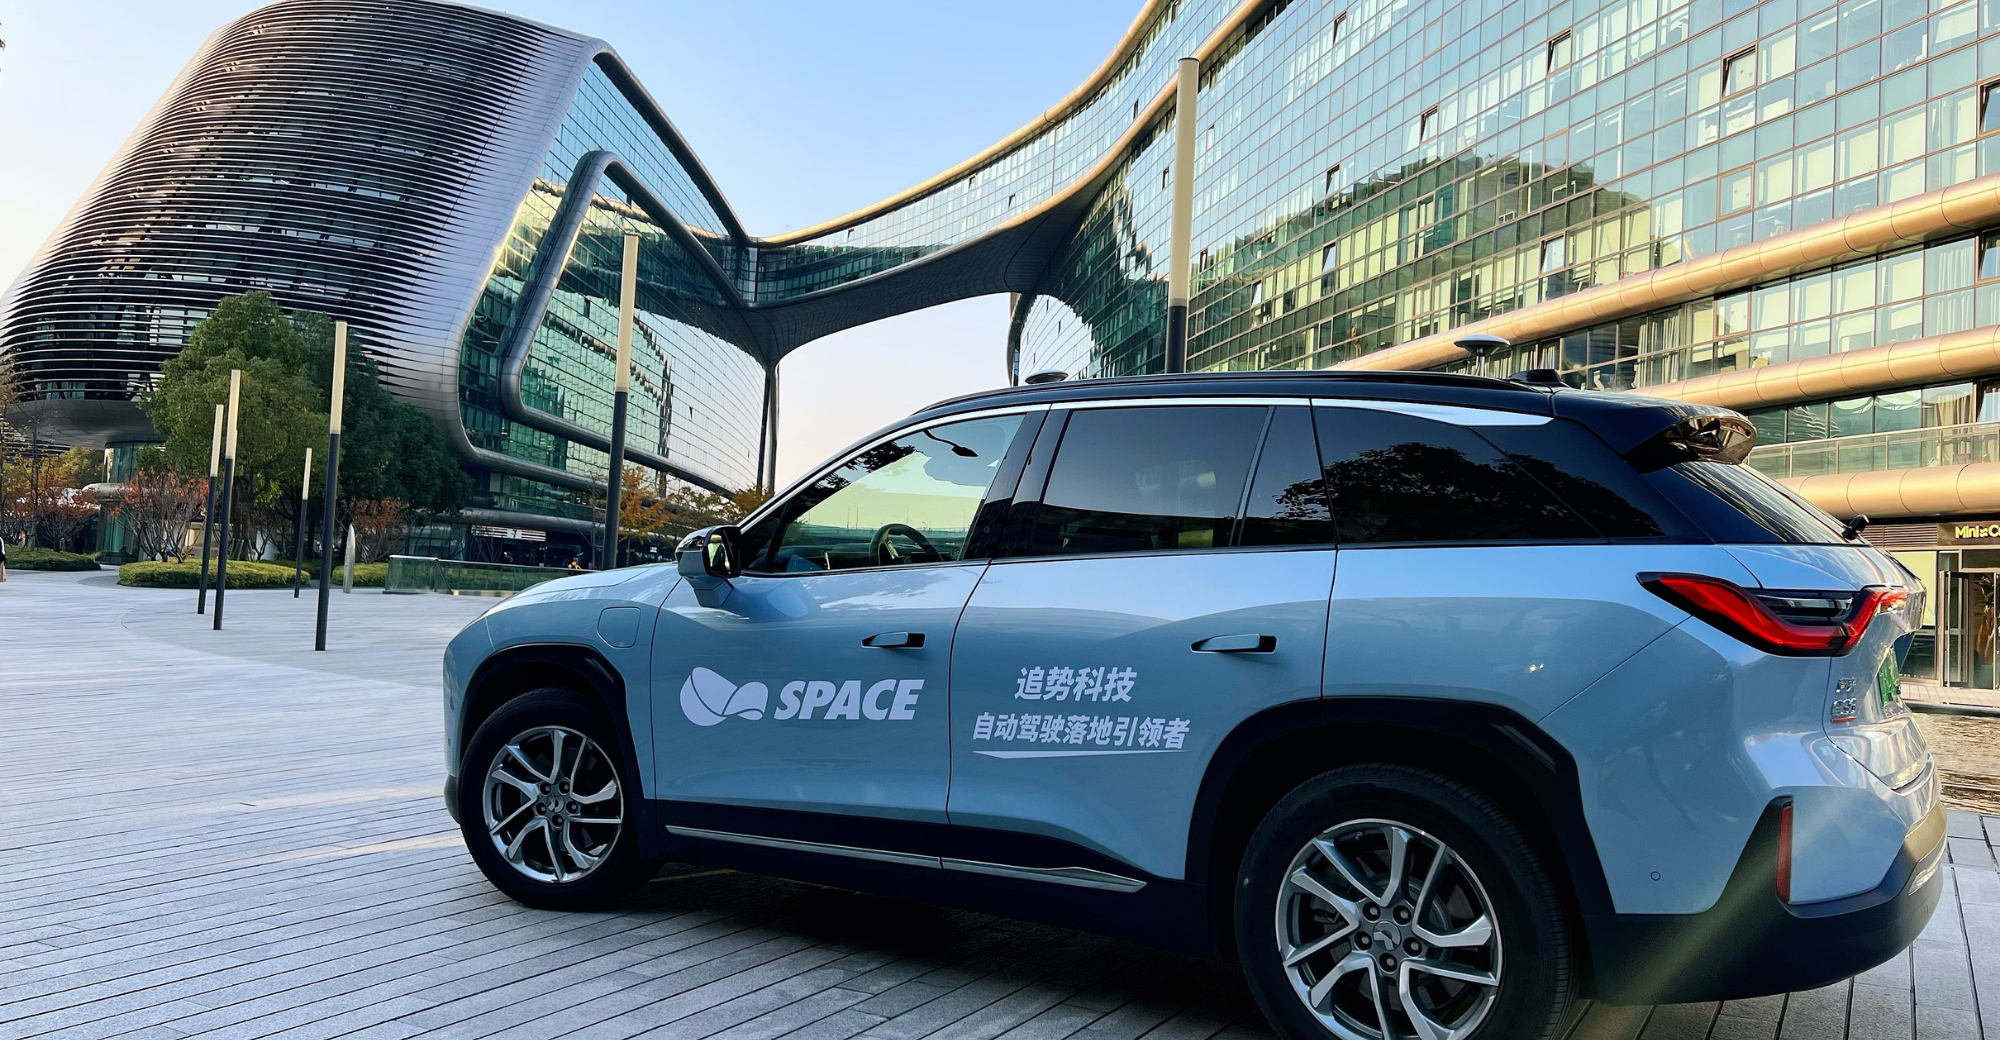 Automated Driving Provider Space Technology Completes A-Round Financing